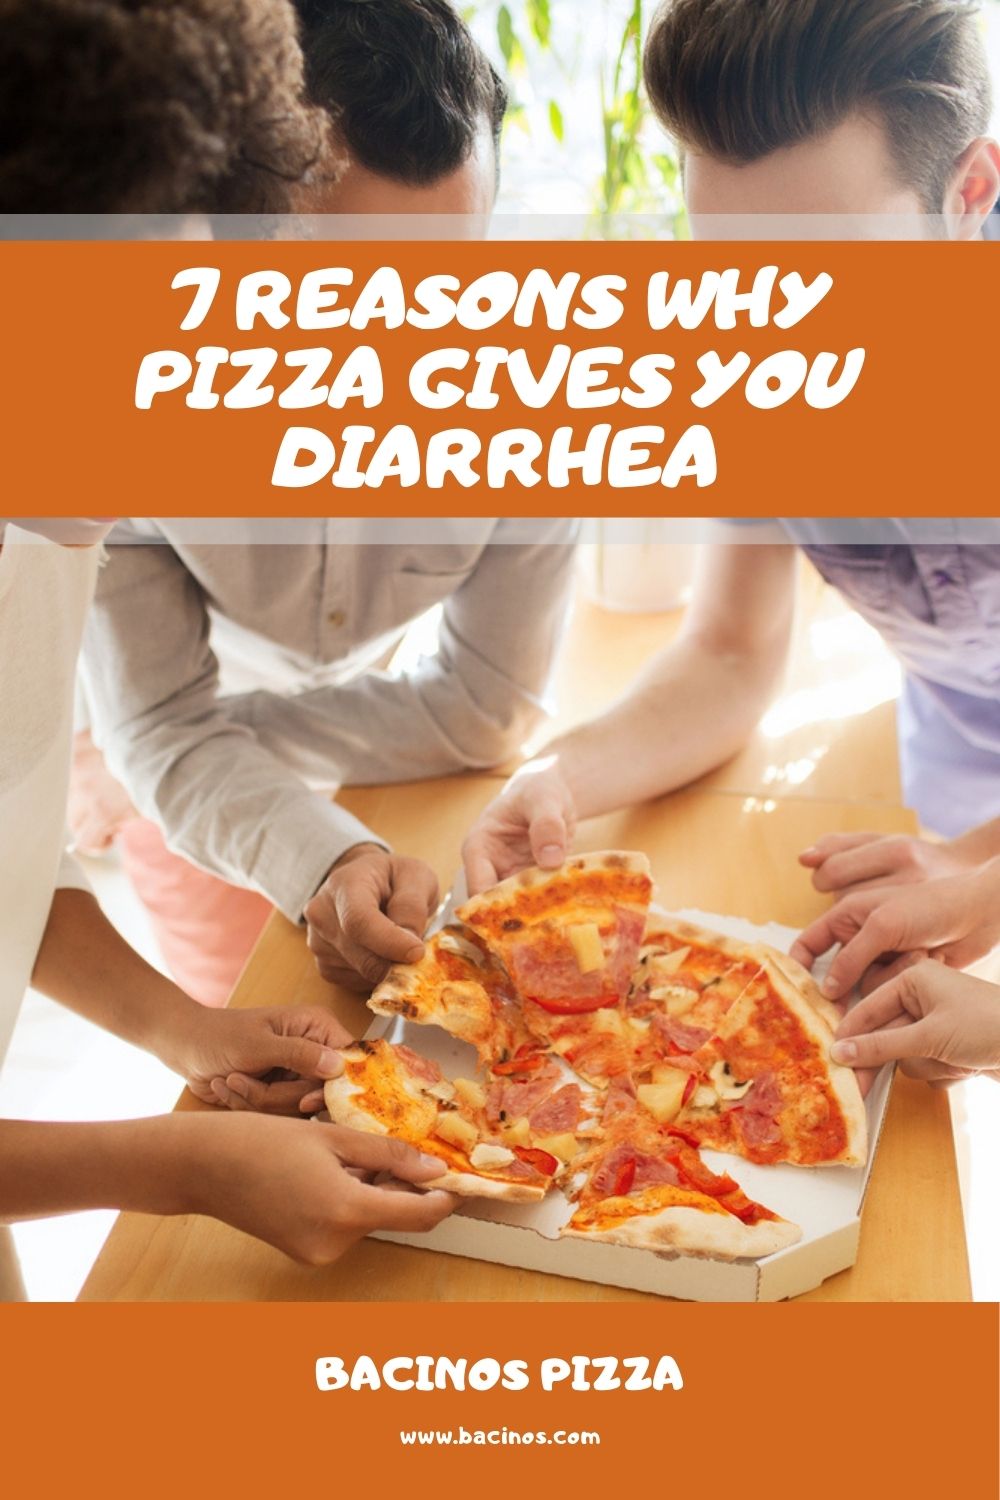 7 Reasons Why Pizza Gives You Diarrhea 3